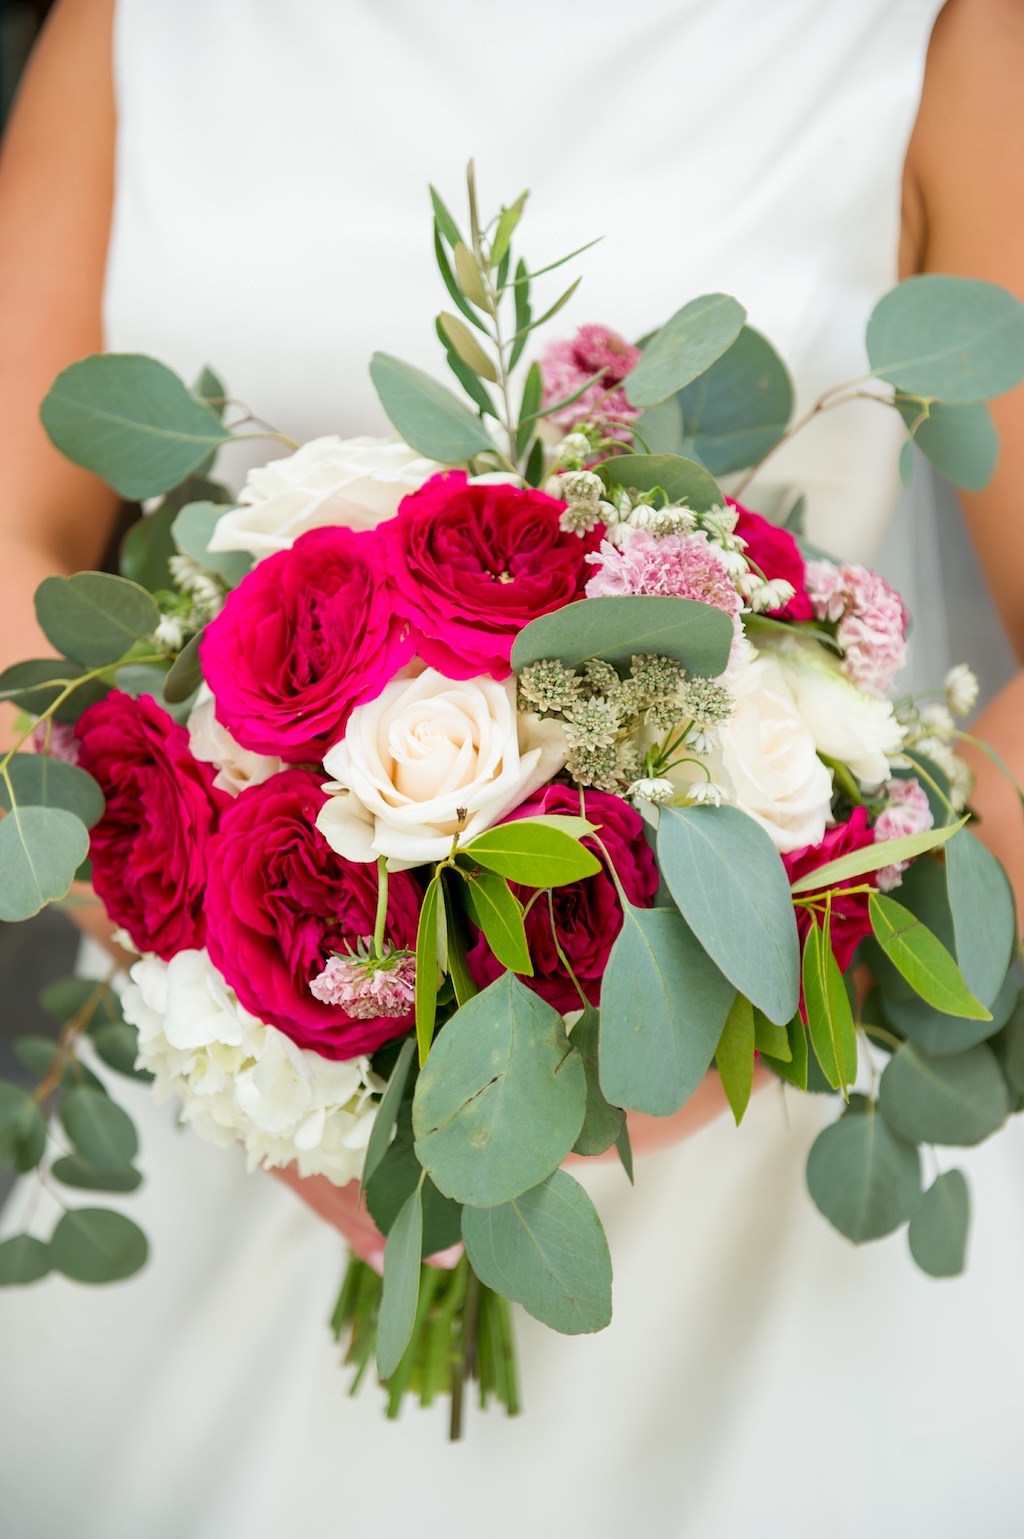 Bridal Bouquet with Magenta and White Roses, Pink Flowers and Greenery